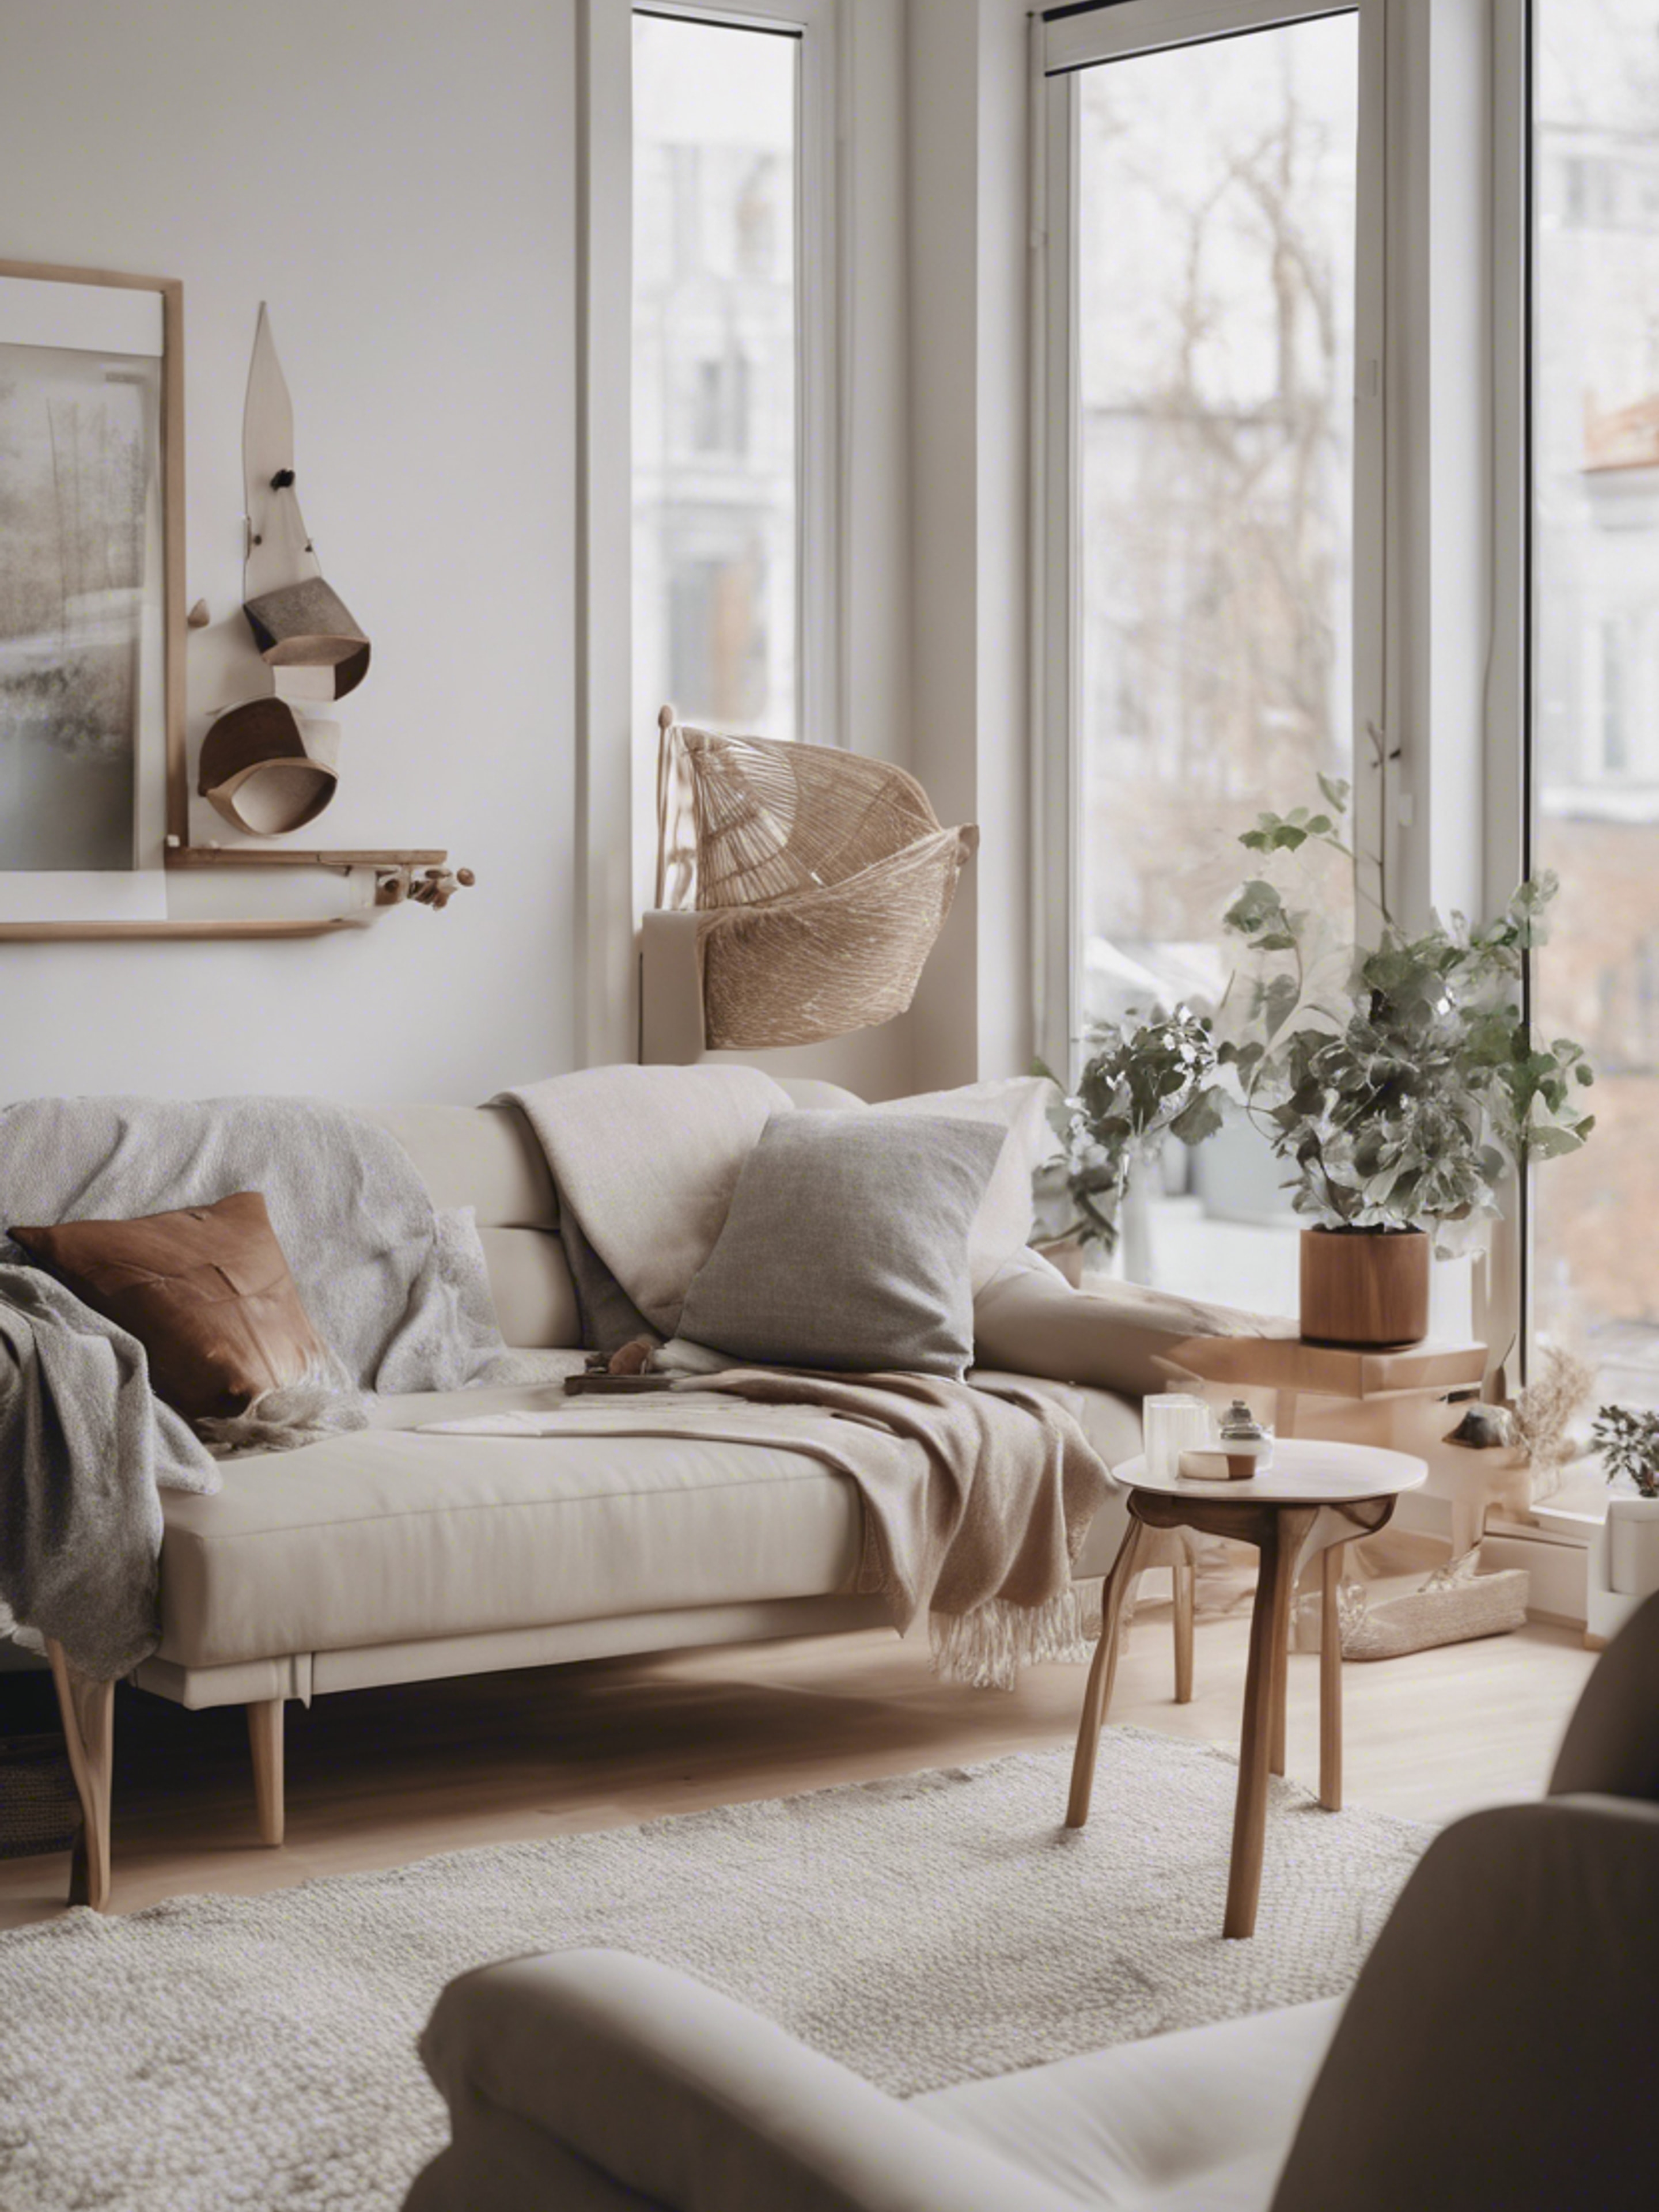 A Nordic-styled apartment with minimalist design, neutral color palette, and cozy accents. วอลล์เปเปอร์[7cbaae500de44ae0bb2d]